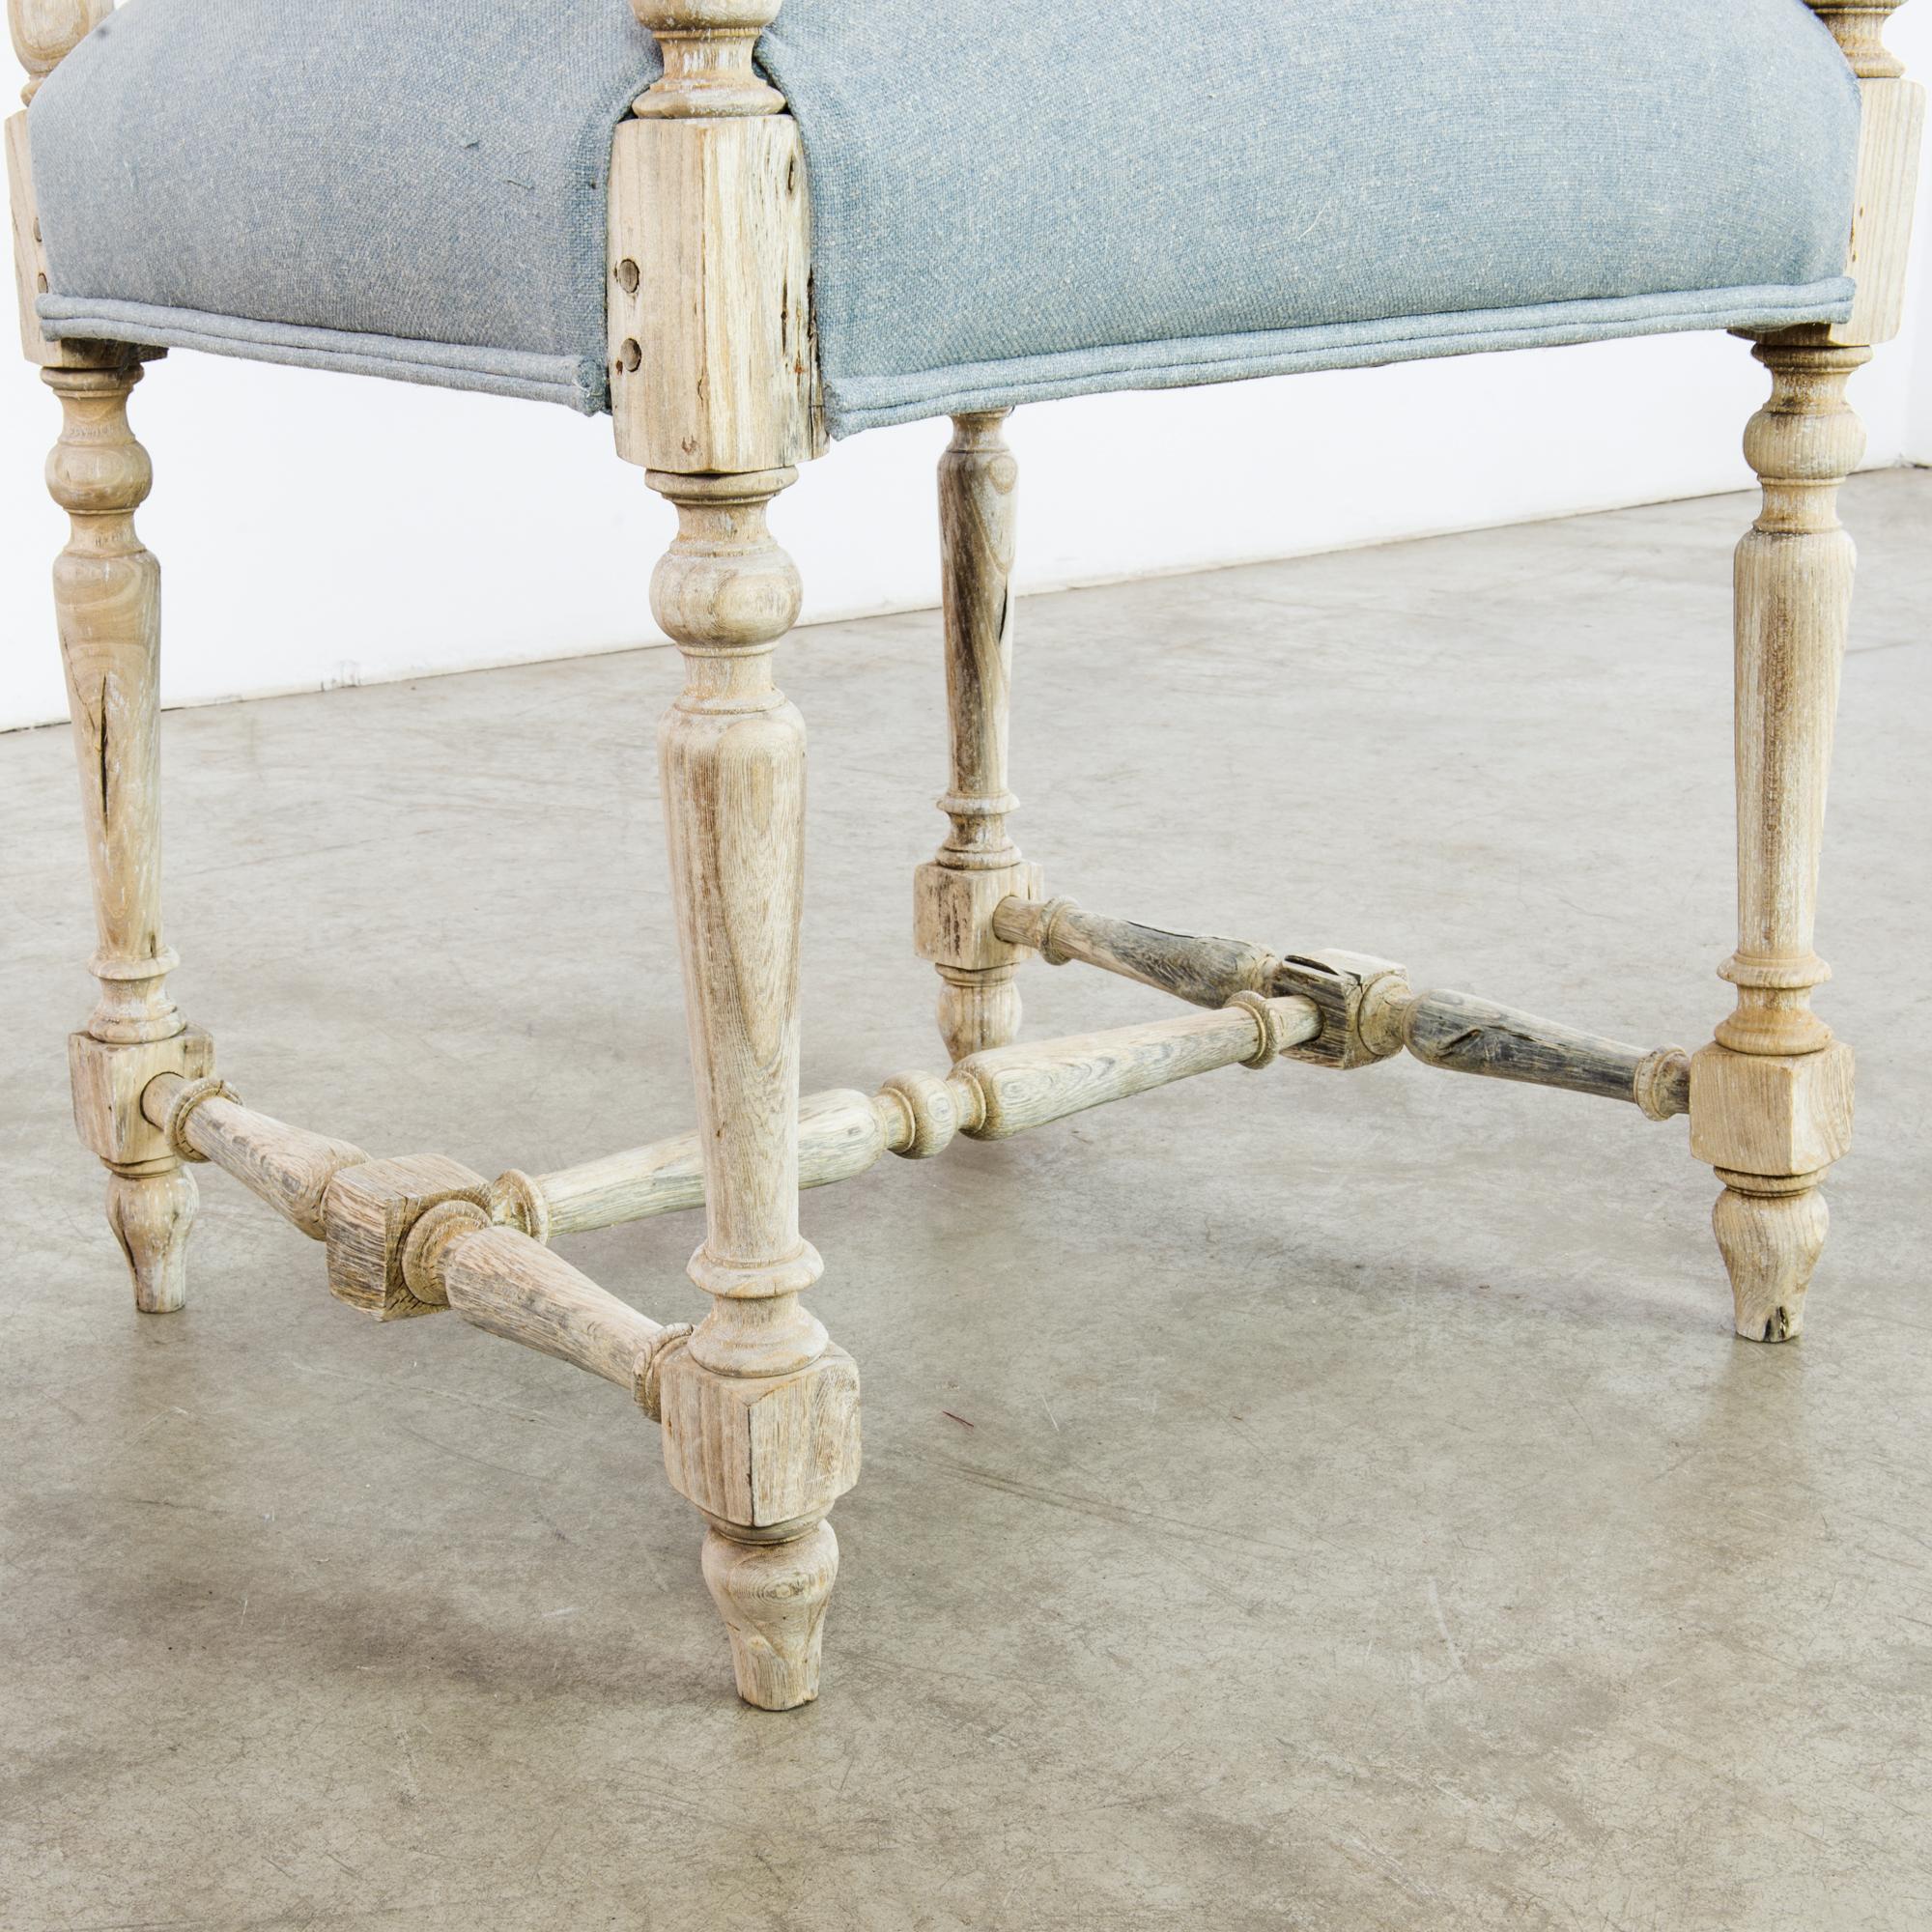 This antique wooden armchair with intricate carvings on the back and armrests was made in France. The captivating details from the spires on the back to the turned legs impart an old-world charm. Refurbished in our atelier with a dusk blue